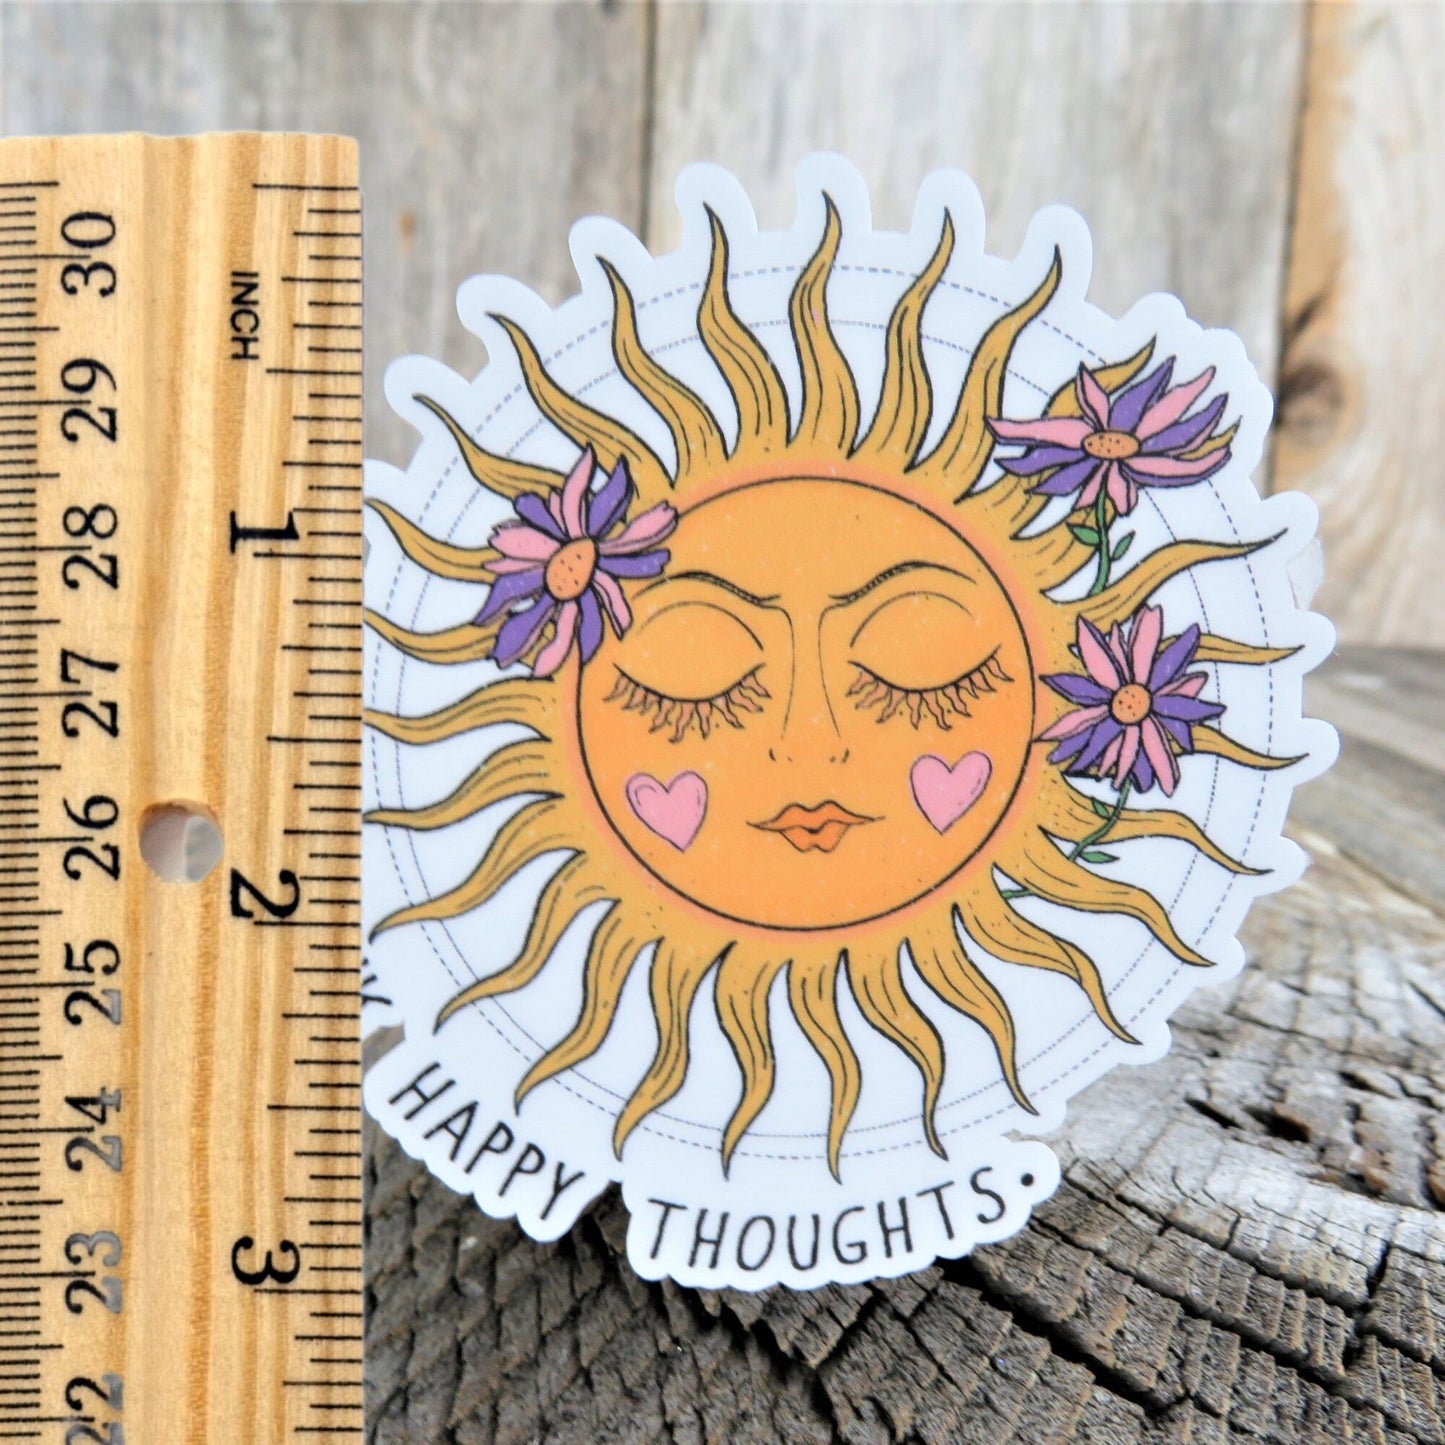 Sun Face Think Happy Thoughts Sticker BoHo Natural Decal Floral Full Color Waterproof Gardener Bugs Car Water Bottle Laptop